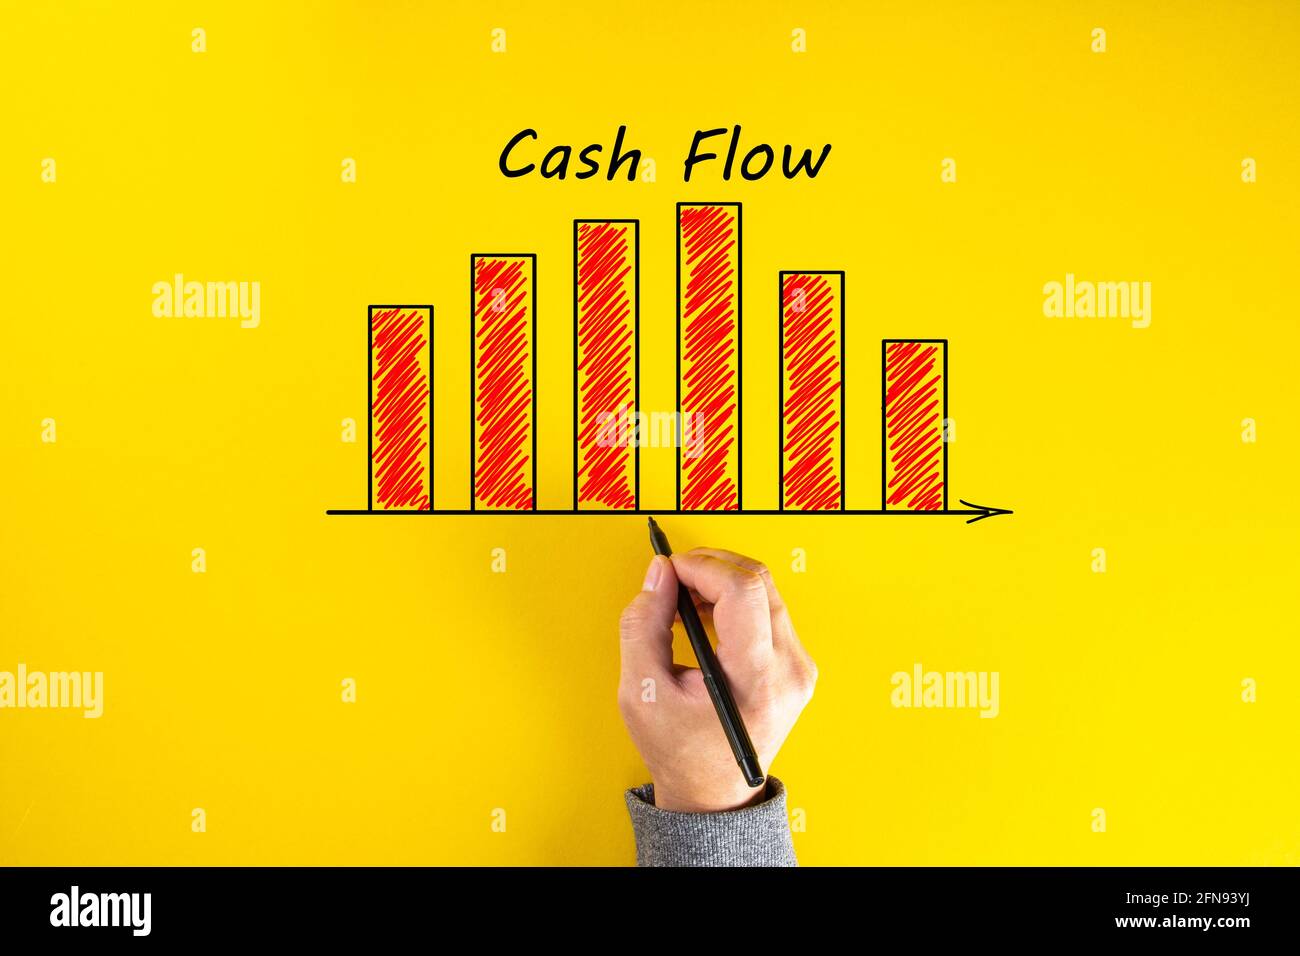 Hands of a businessman drawing a cash flow chart. Corporate cash flow analysis concept. Stock Photo